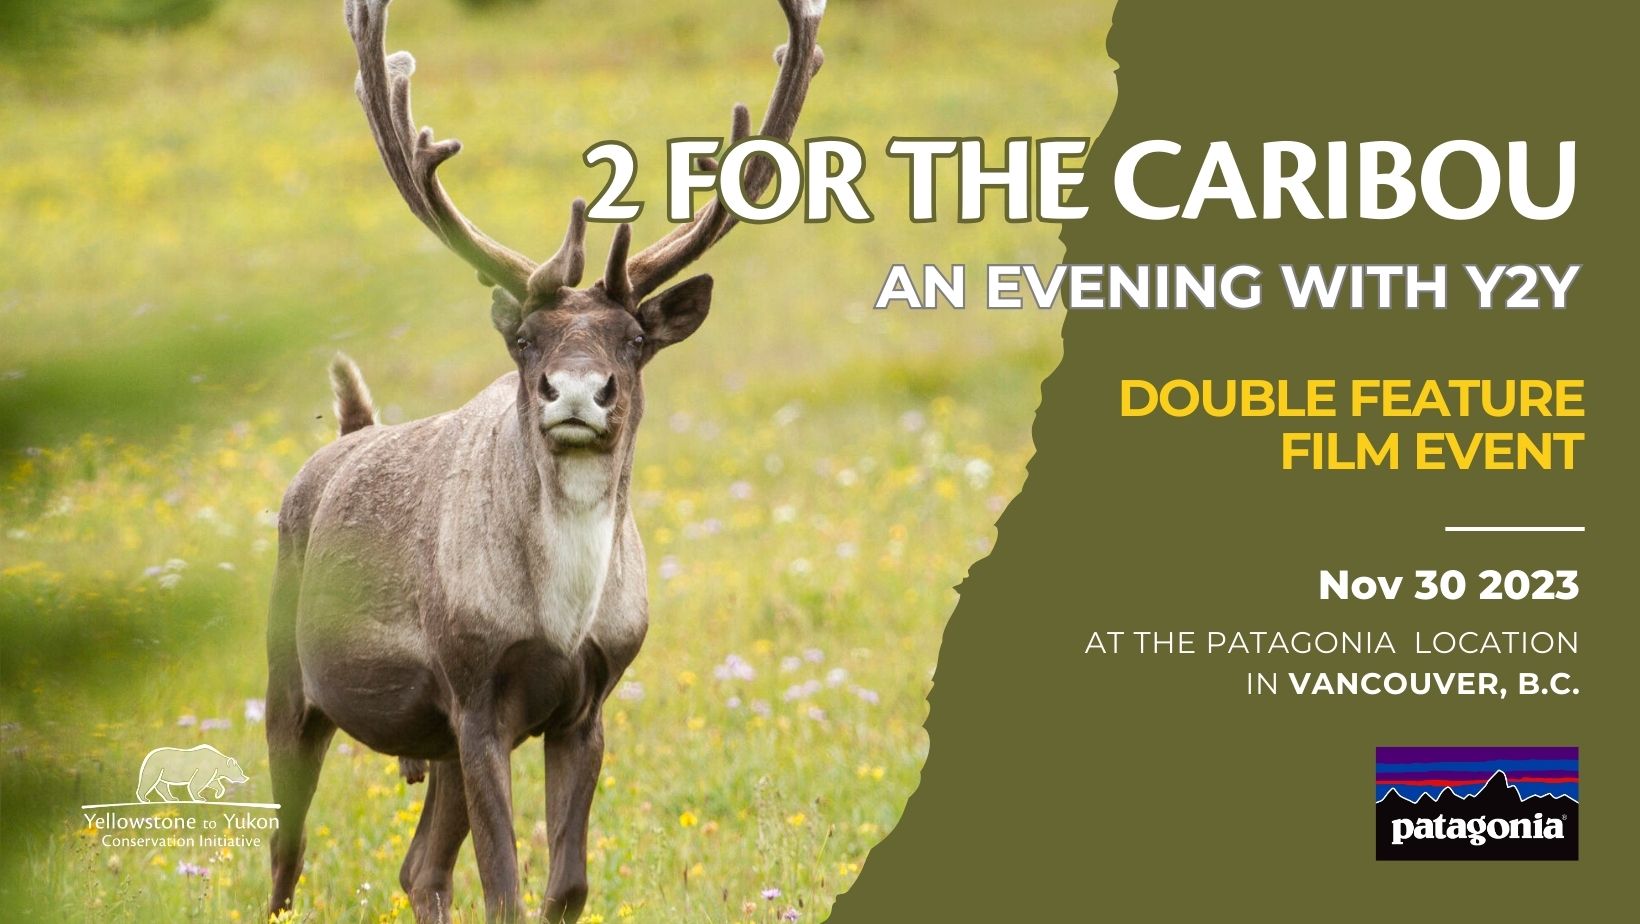 A photo of a caribou standing in the middle of a grassy meadow. Image caption reads: 2 for the caribou, an evening with Y2Y. Double feature film event. November 30, 2023 at the Patagonia Elements location in Vancouver, B.C.